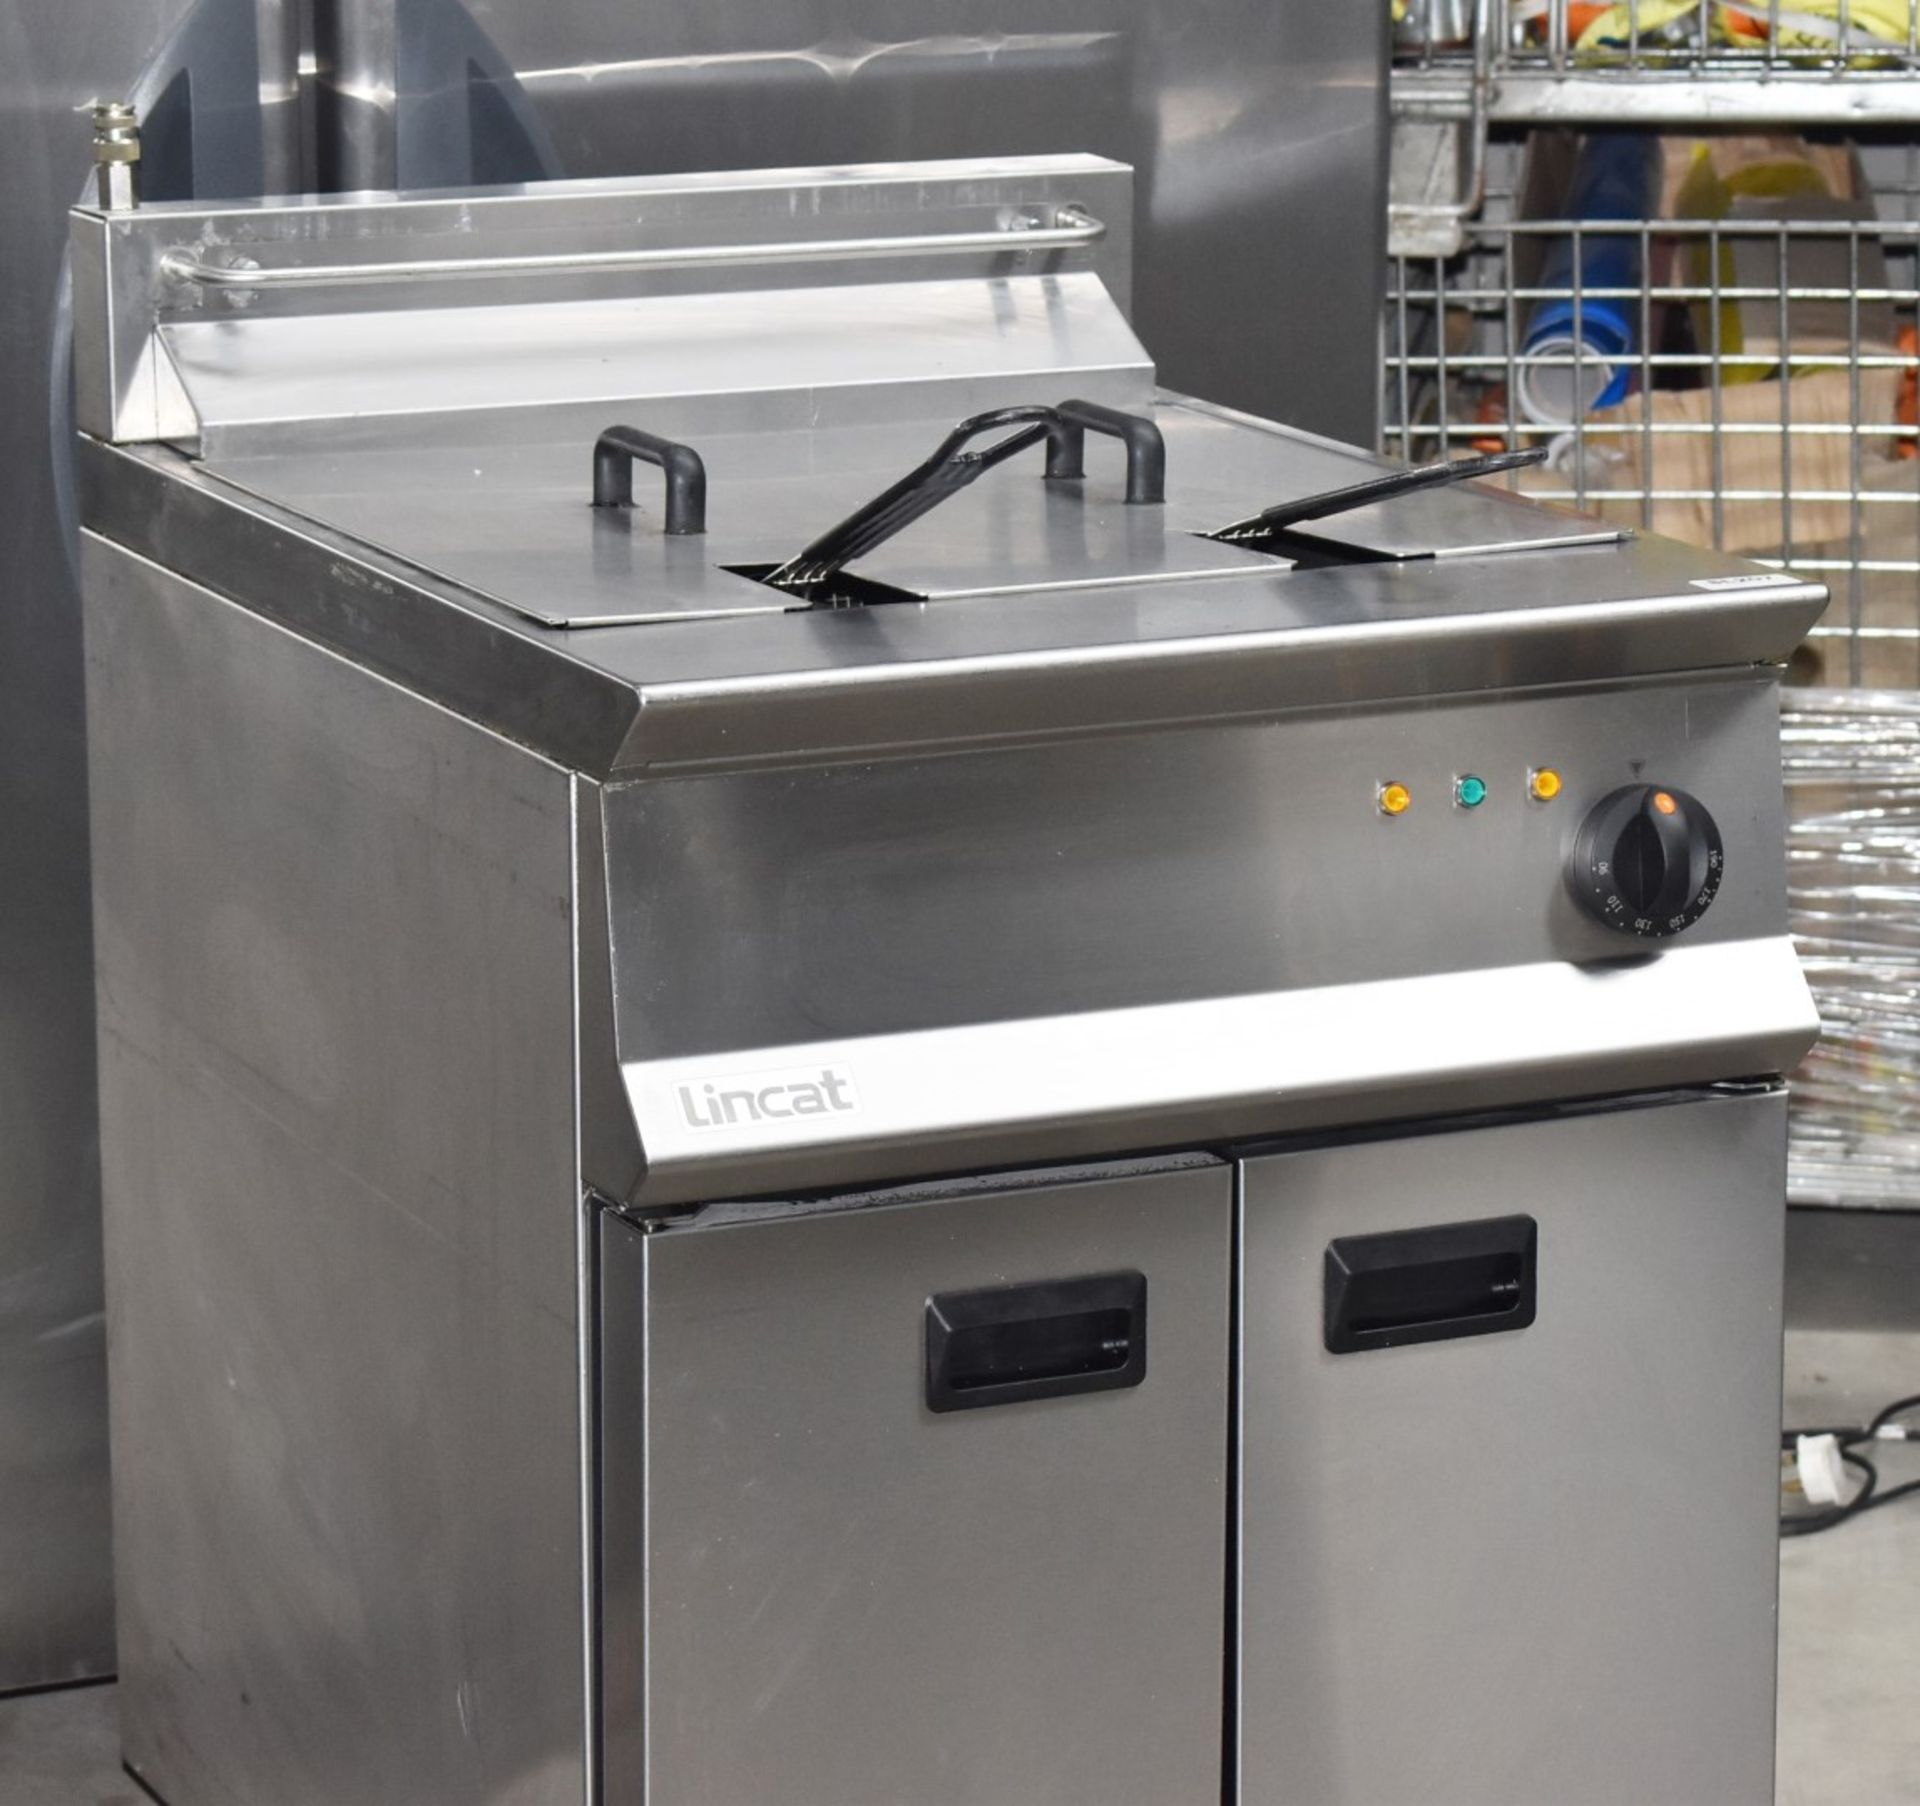 1 x Lincat Opus 800 OE8108 Single Tank Electric Fryer With Filtration - 37L Tank With Two - Image 16 of 17